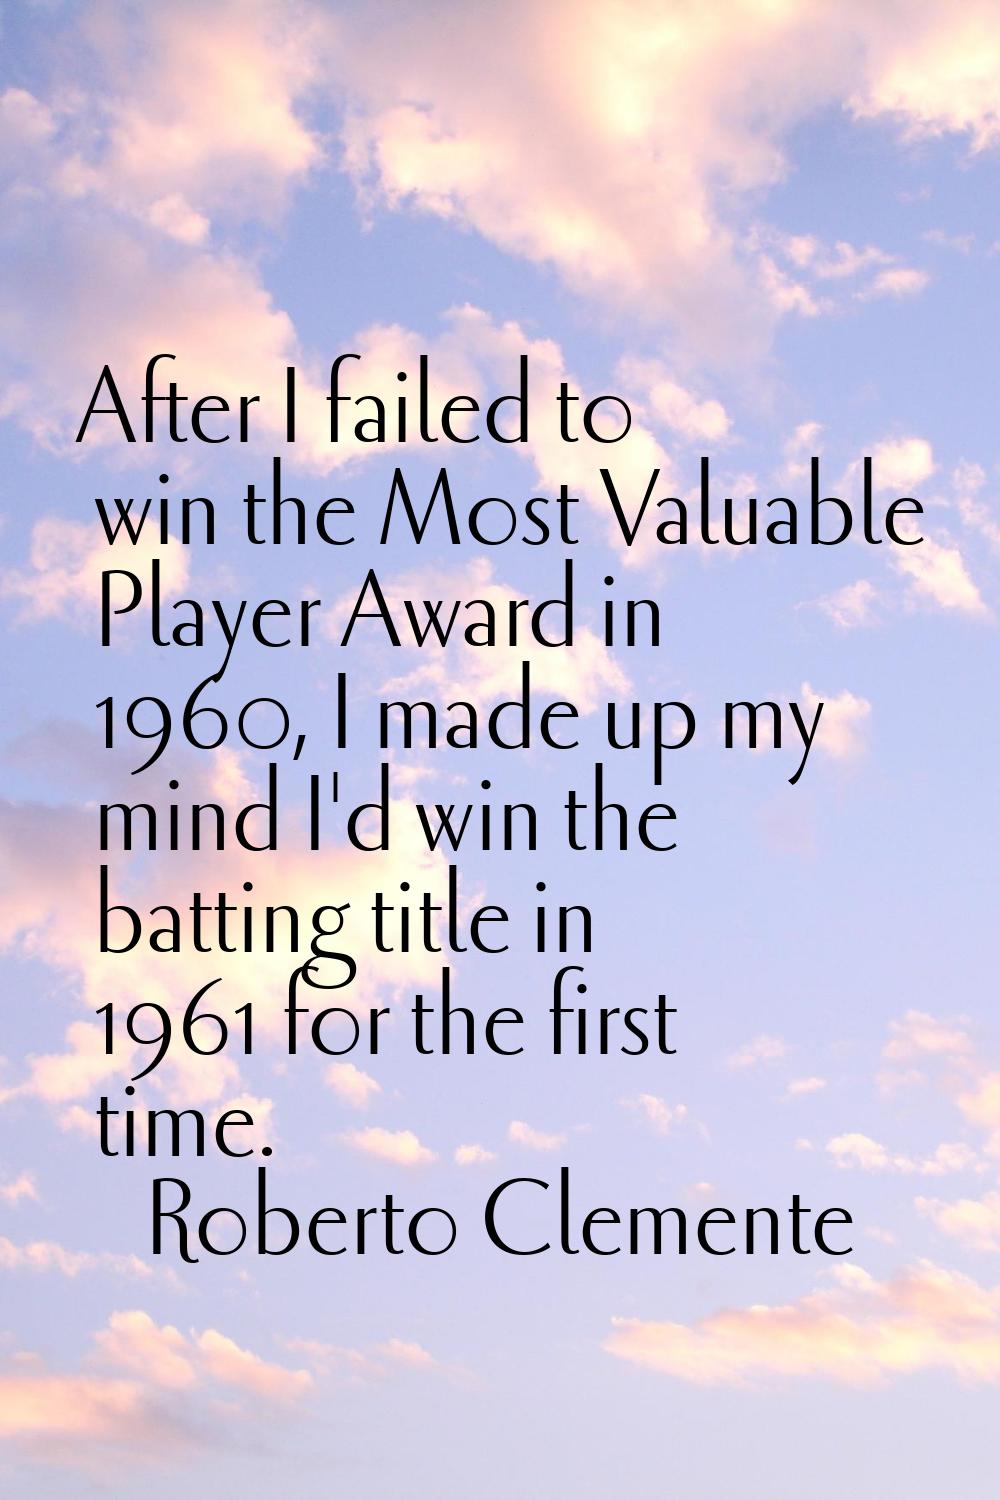 After I failed to win the Most Valuable Player Award in 1960, I made up my mind I'd win the batting